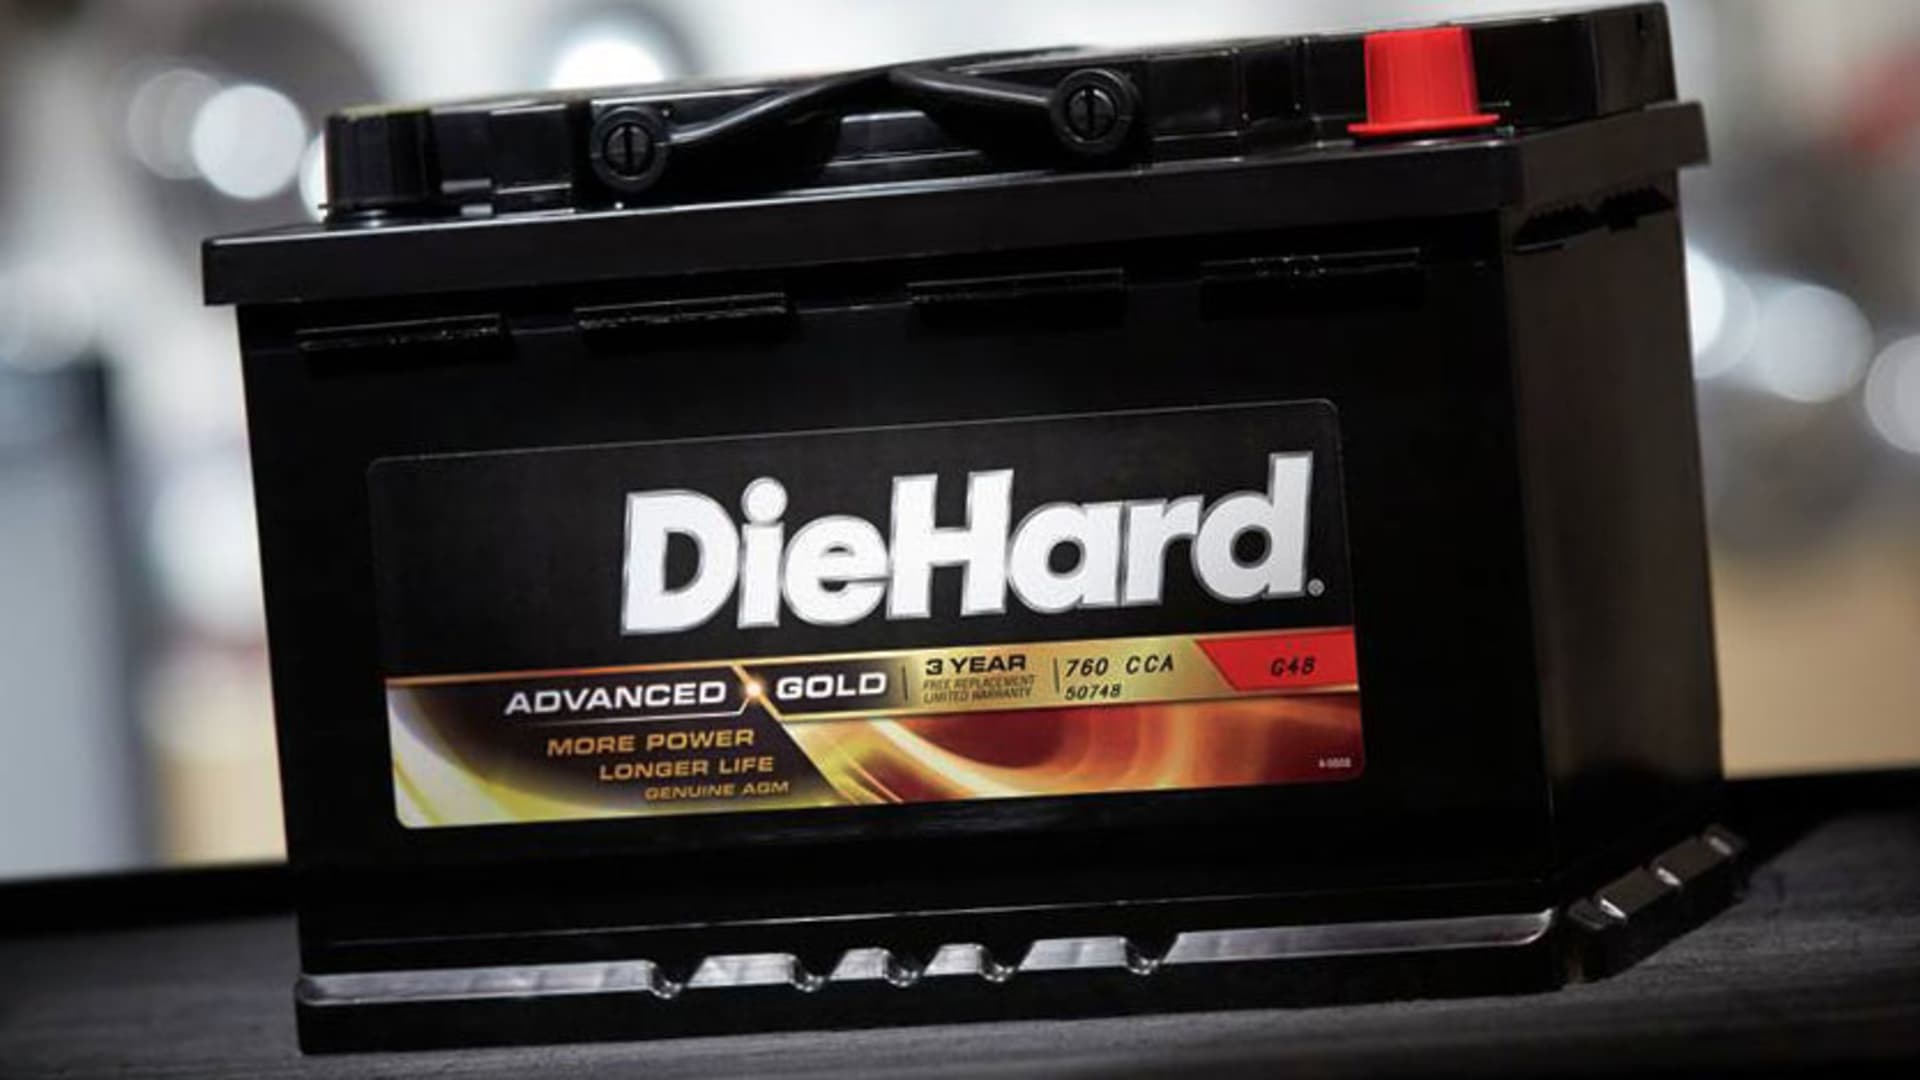 Advance Auto Parts to buy DieHard brand from Sears for $200 million in cash deal